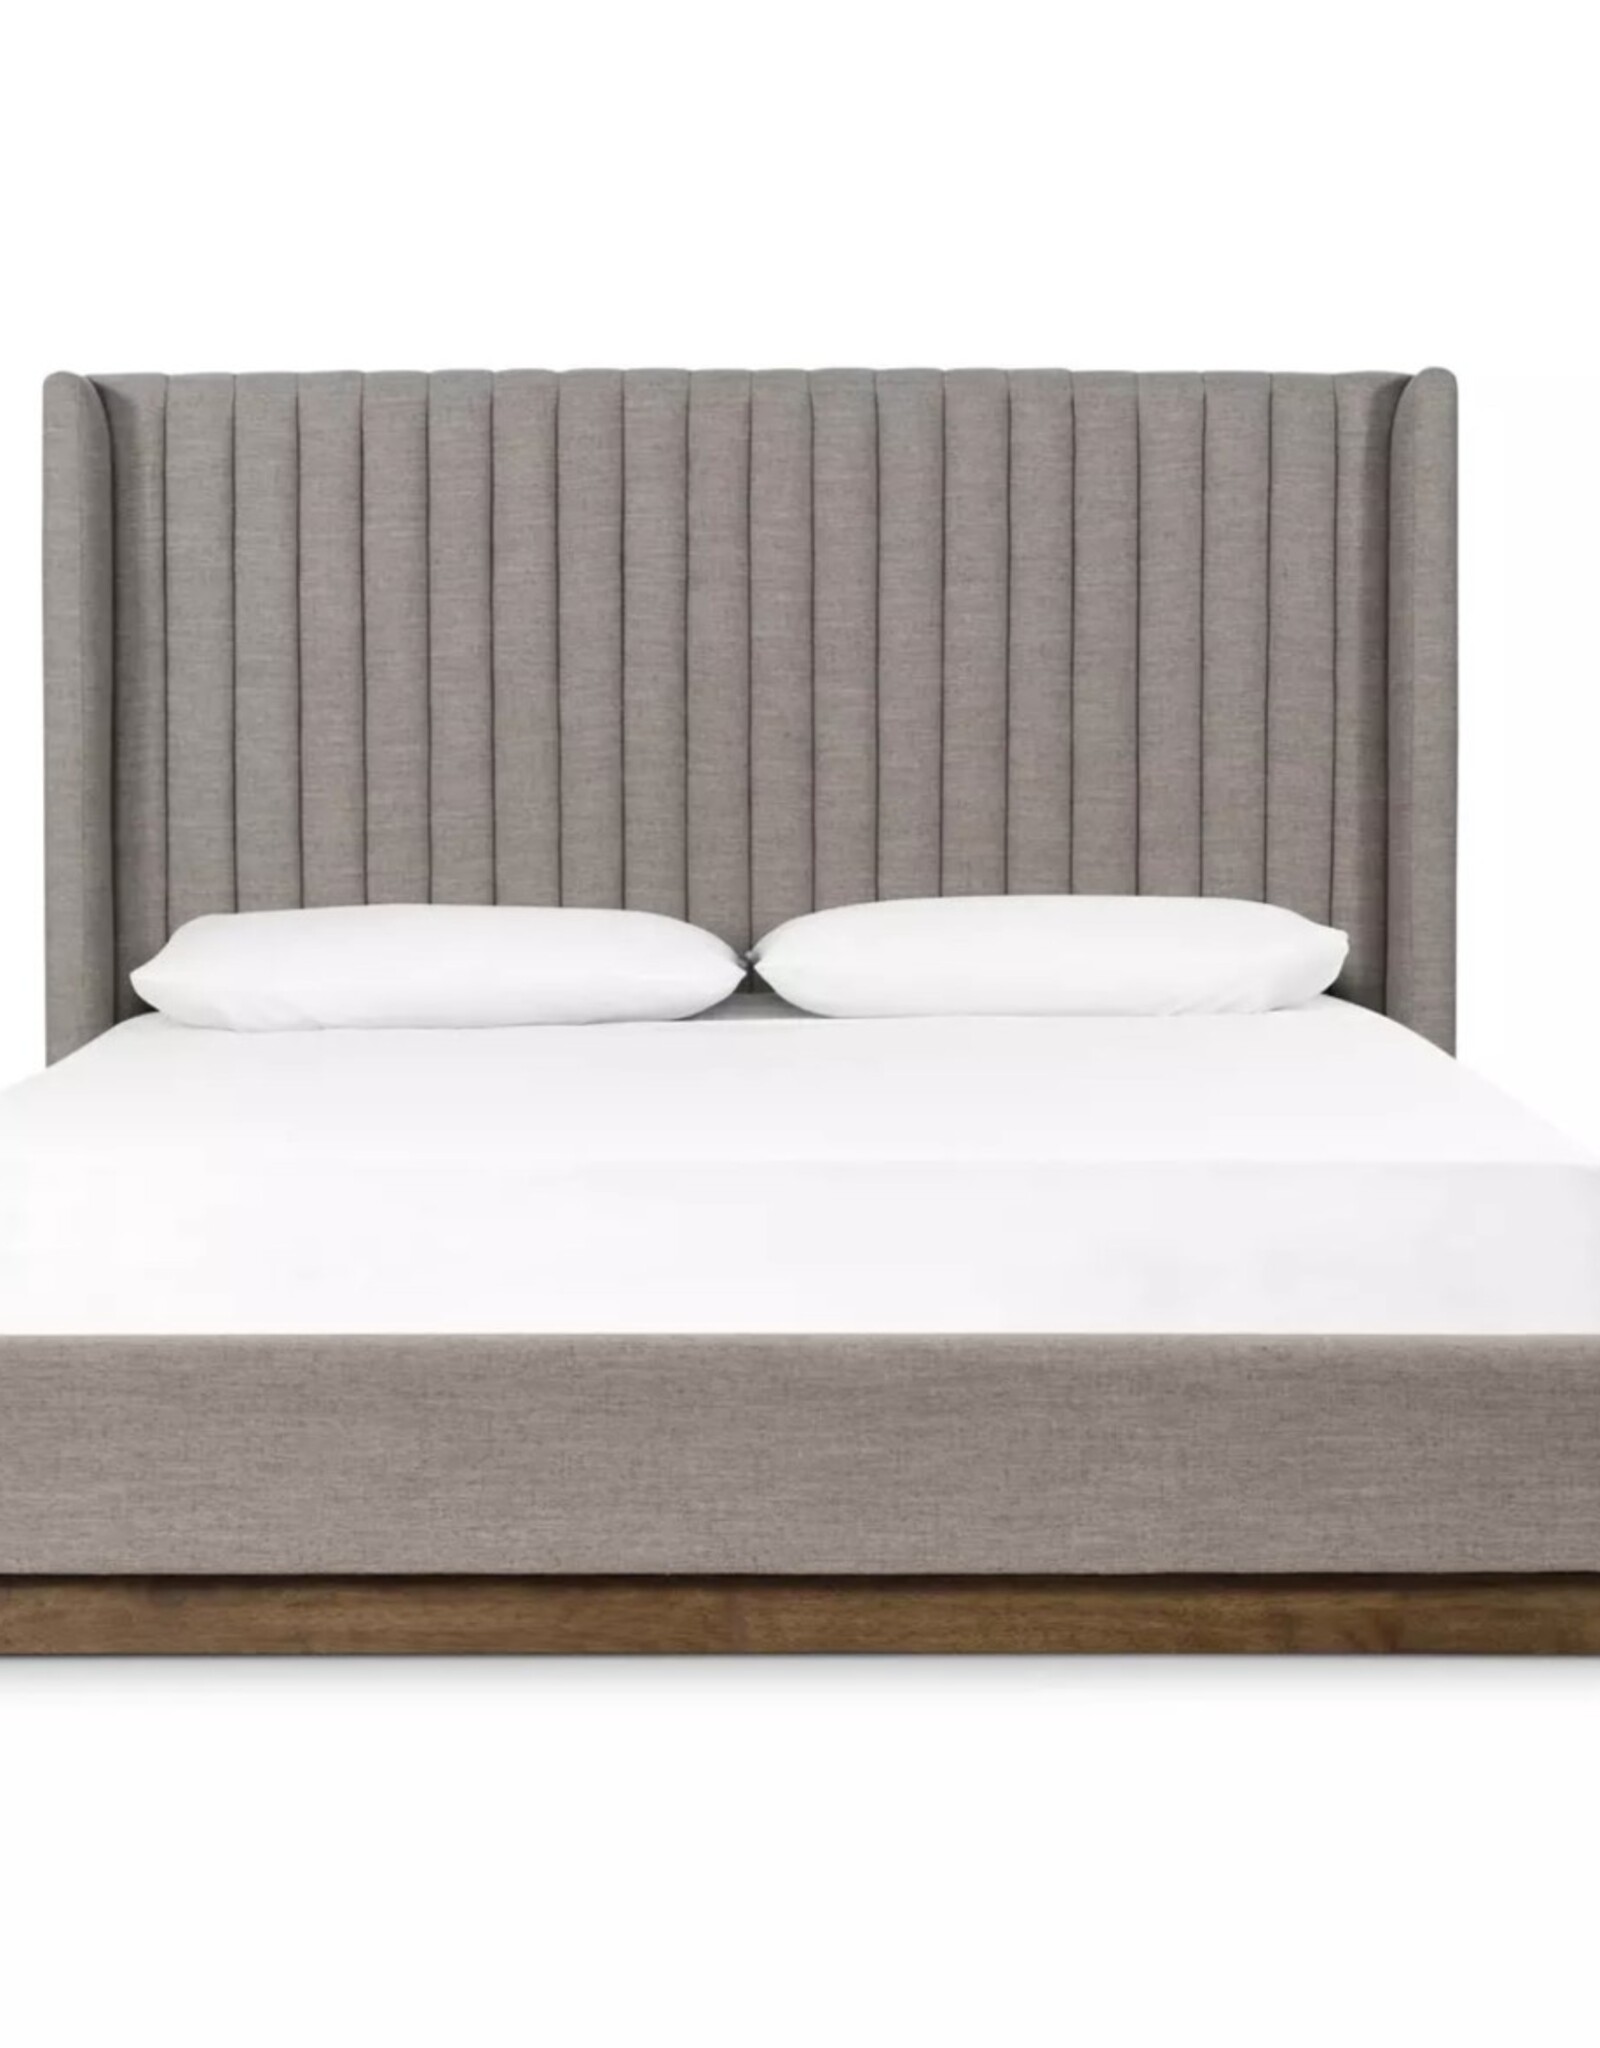 Montgomery King Bed in Saville Flannel